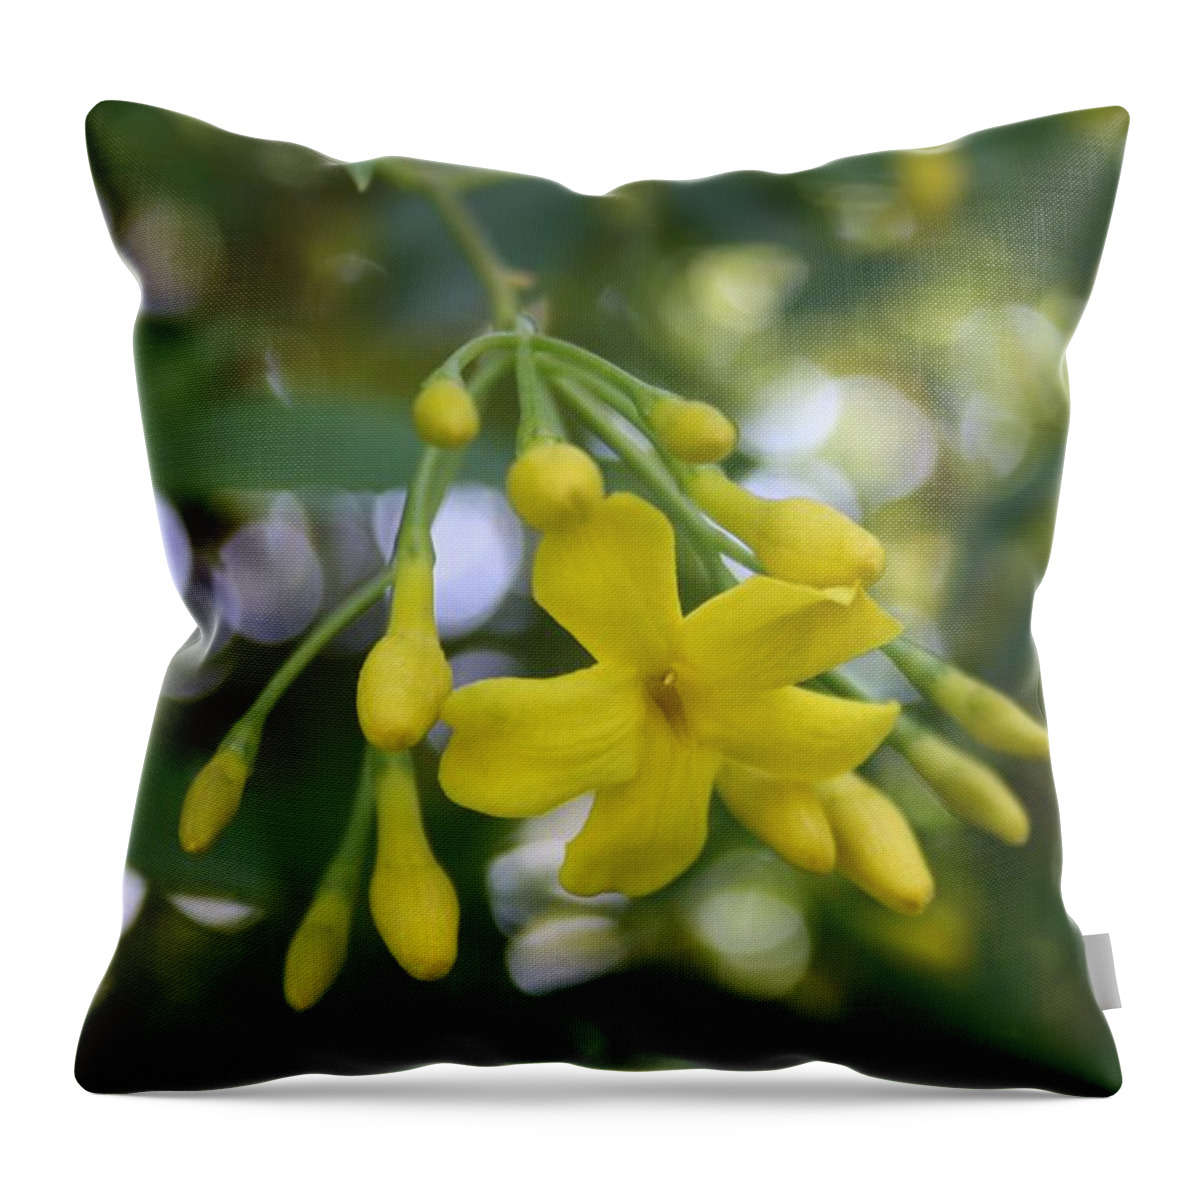 Bud Throw Pillow featuring the painting Close Up Of Carolina Jasmiine. by Taiche Acrylic Art